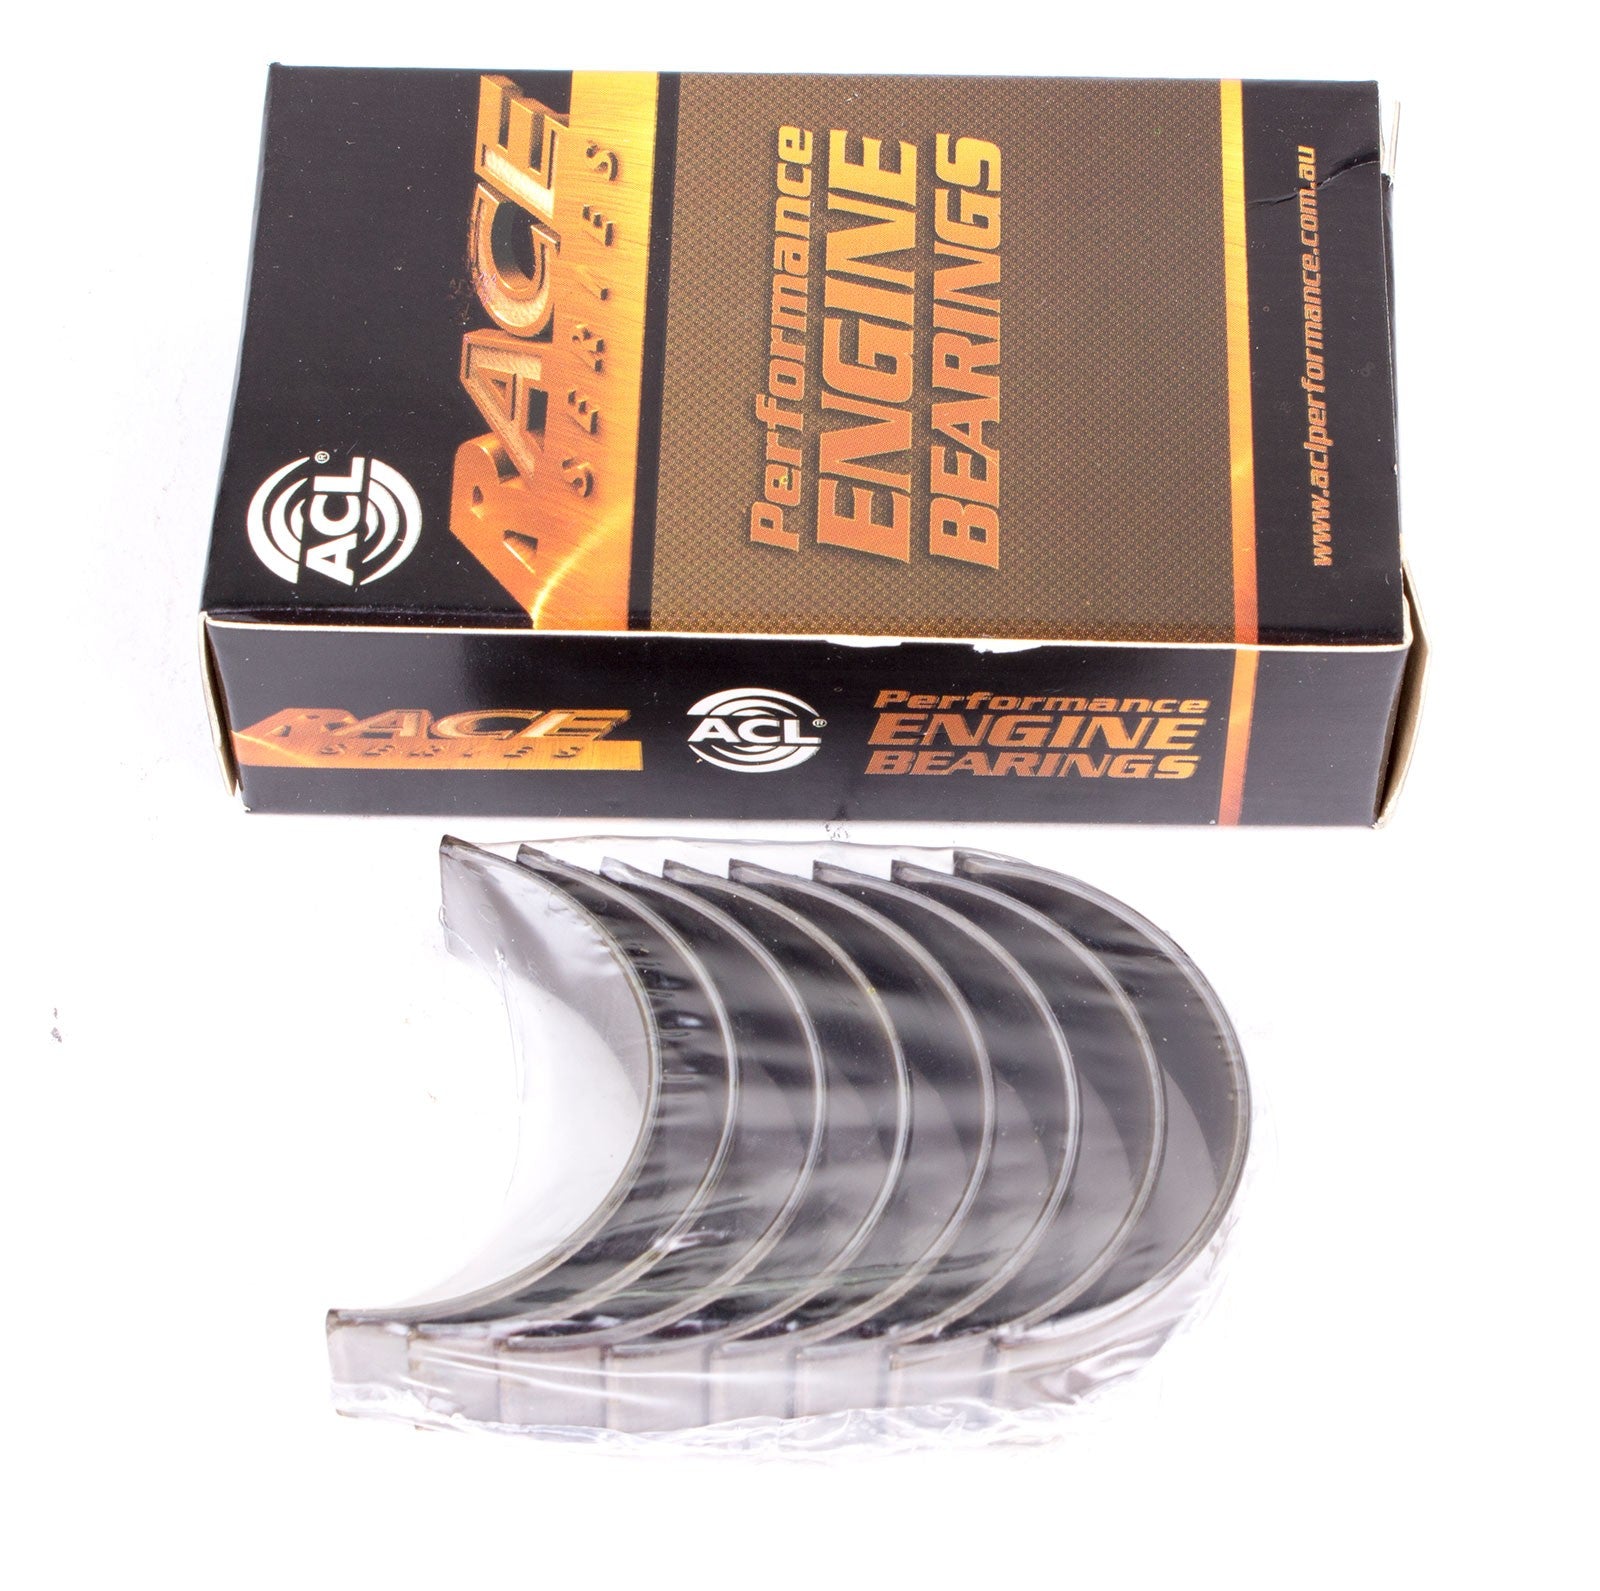 ACL 3M2204H-001 Main bearing set (ACL Race Series) Photo-0 